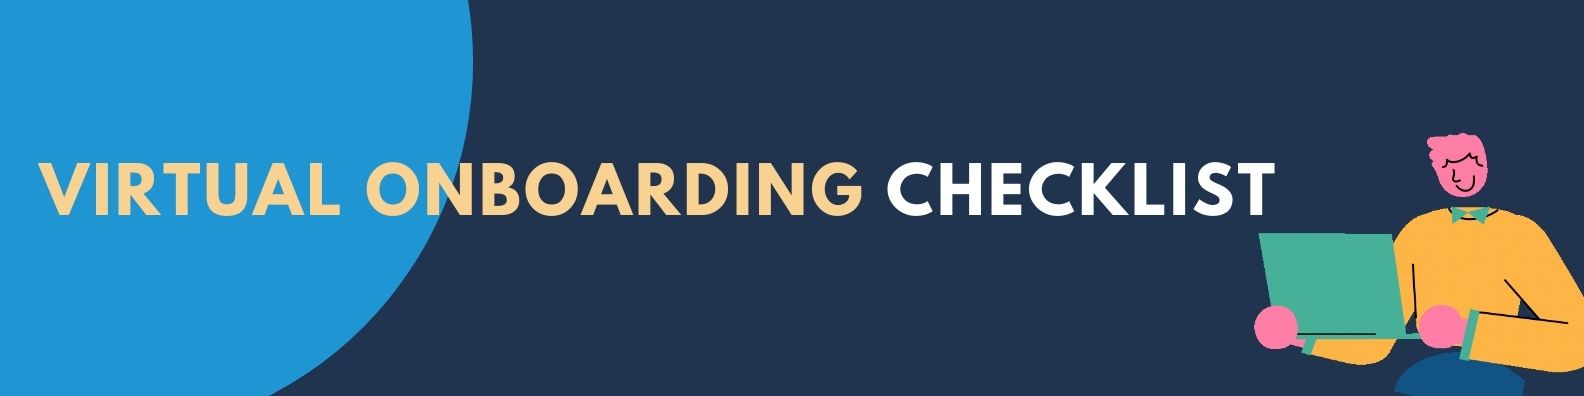 Top Banner saying Virtual Onboarding Checklist